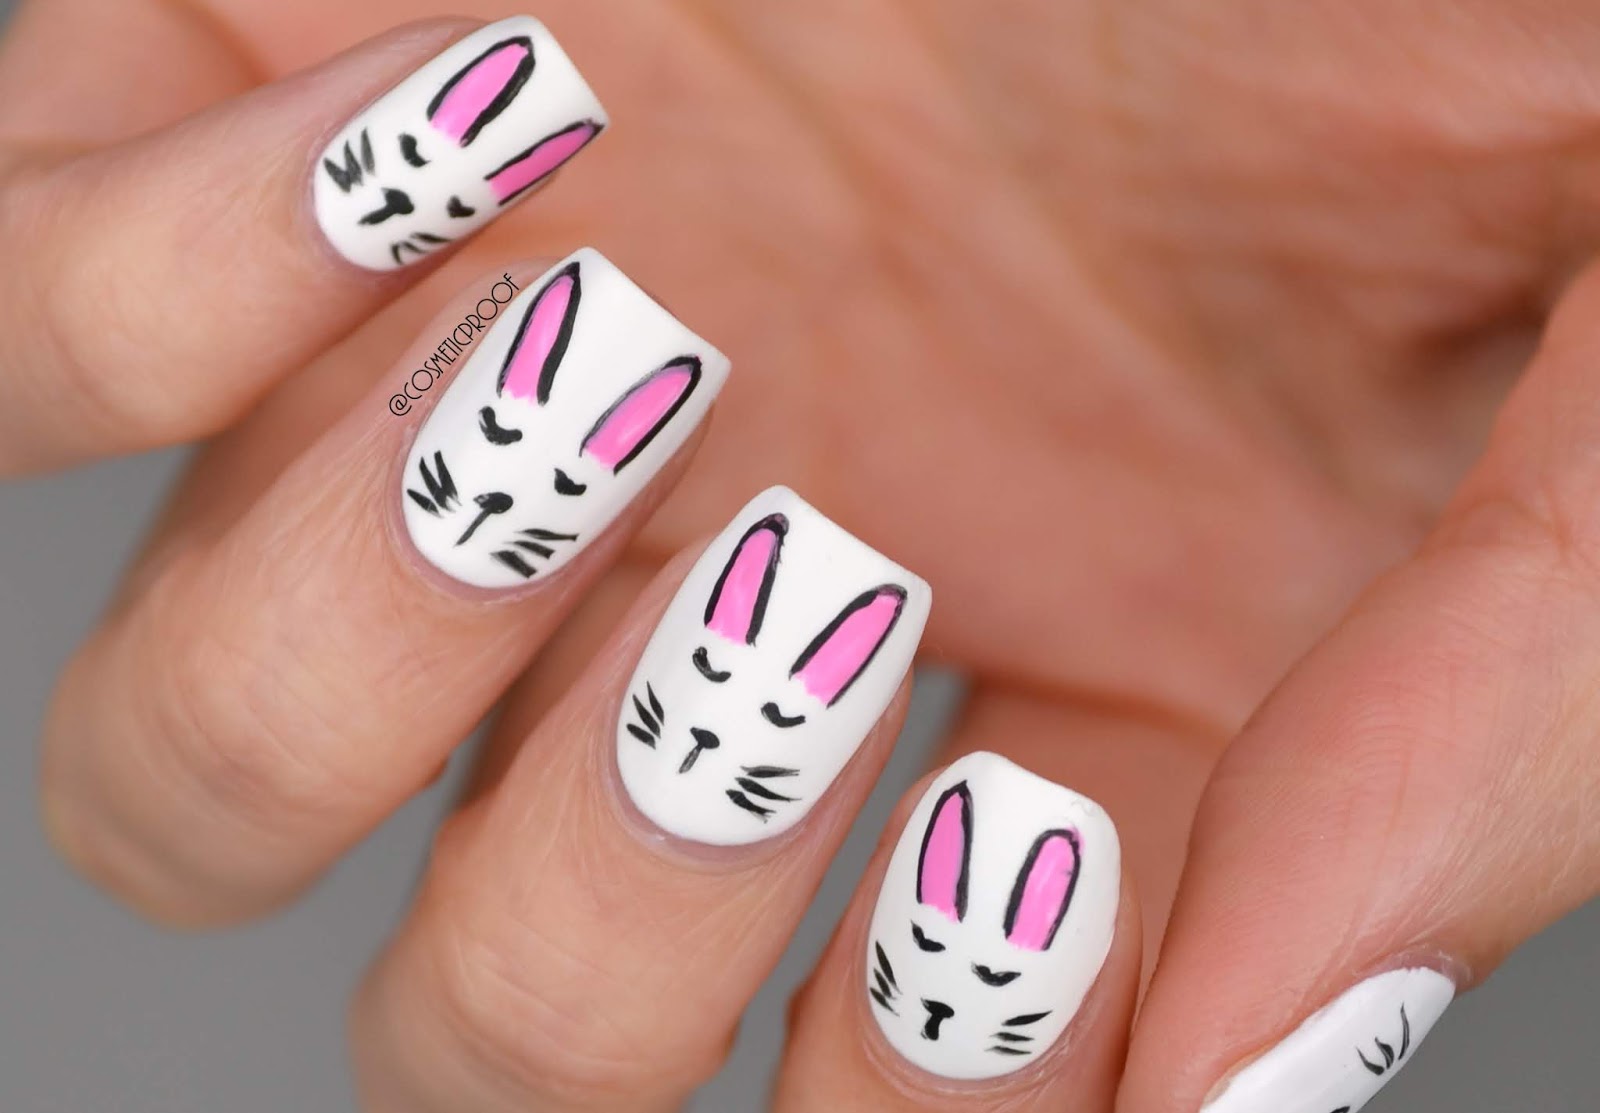 1. Cute Easter Bunny Nail Design Ideas - wide 6